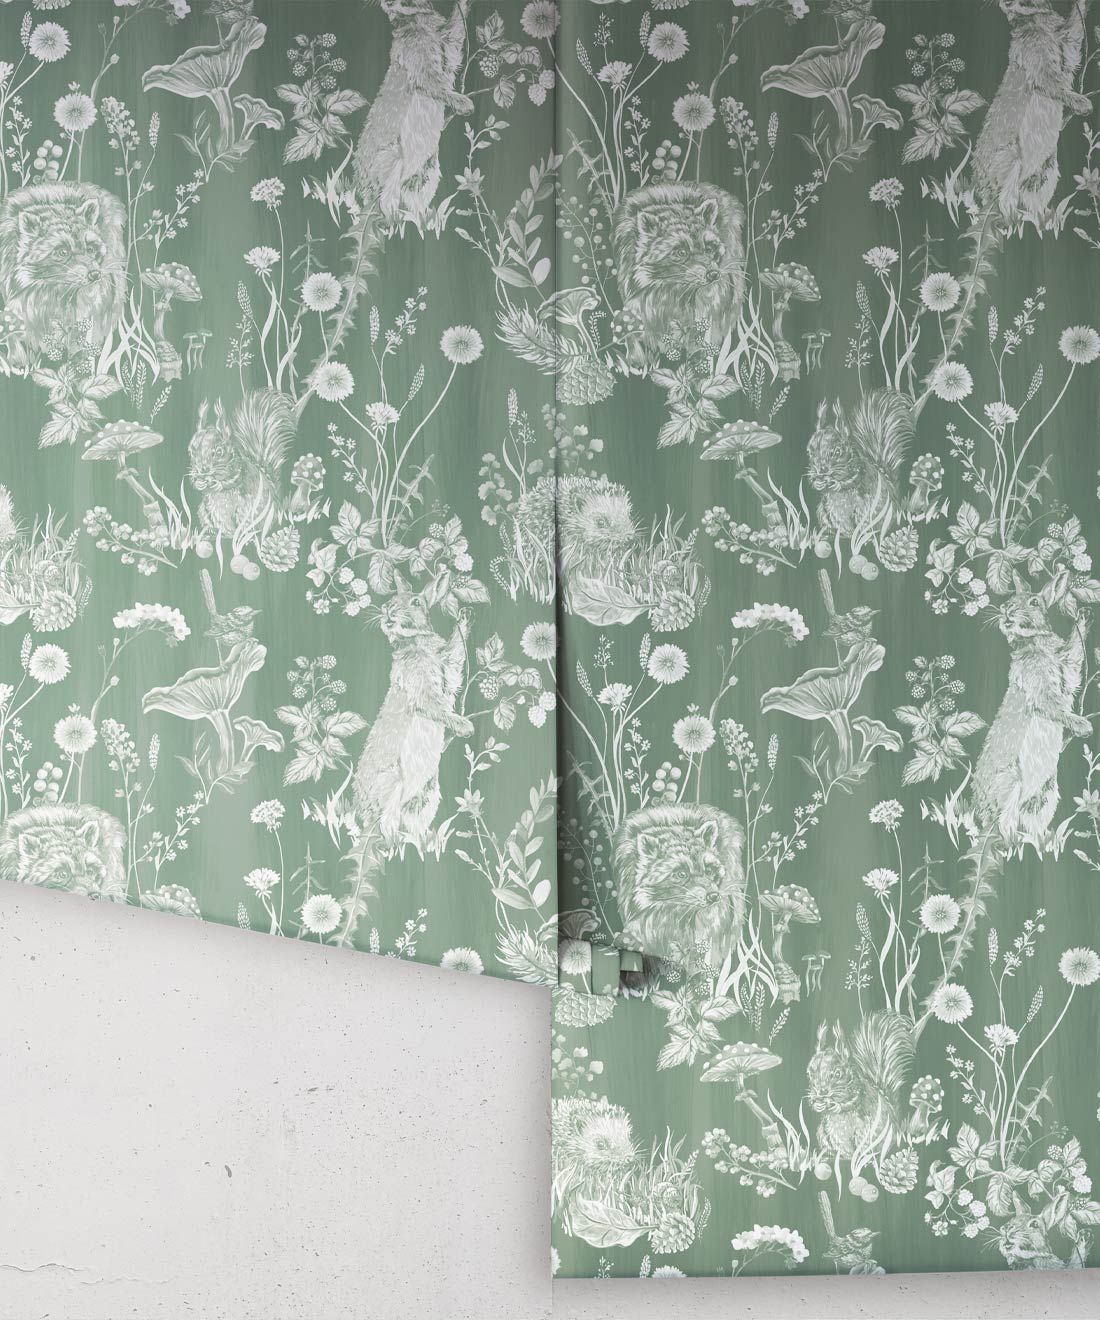 Woodland Friends Wallpaper • Forest Wallpaper with rabbits, hares, raccoons • Iryna Ruggeri • Green • Rolls